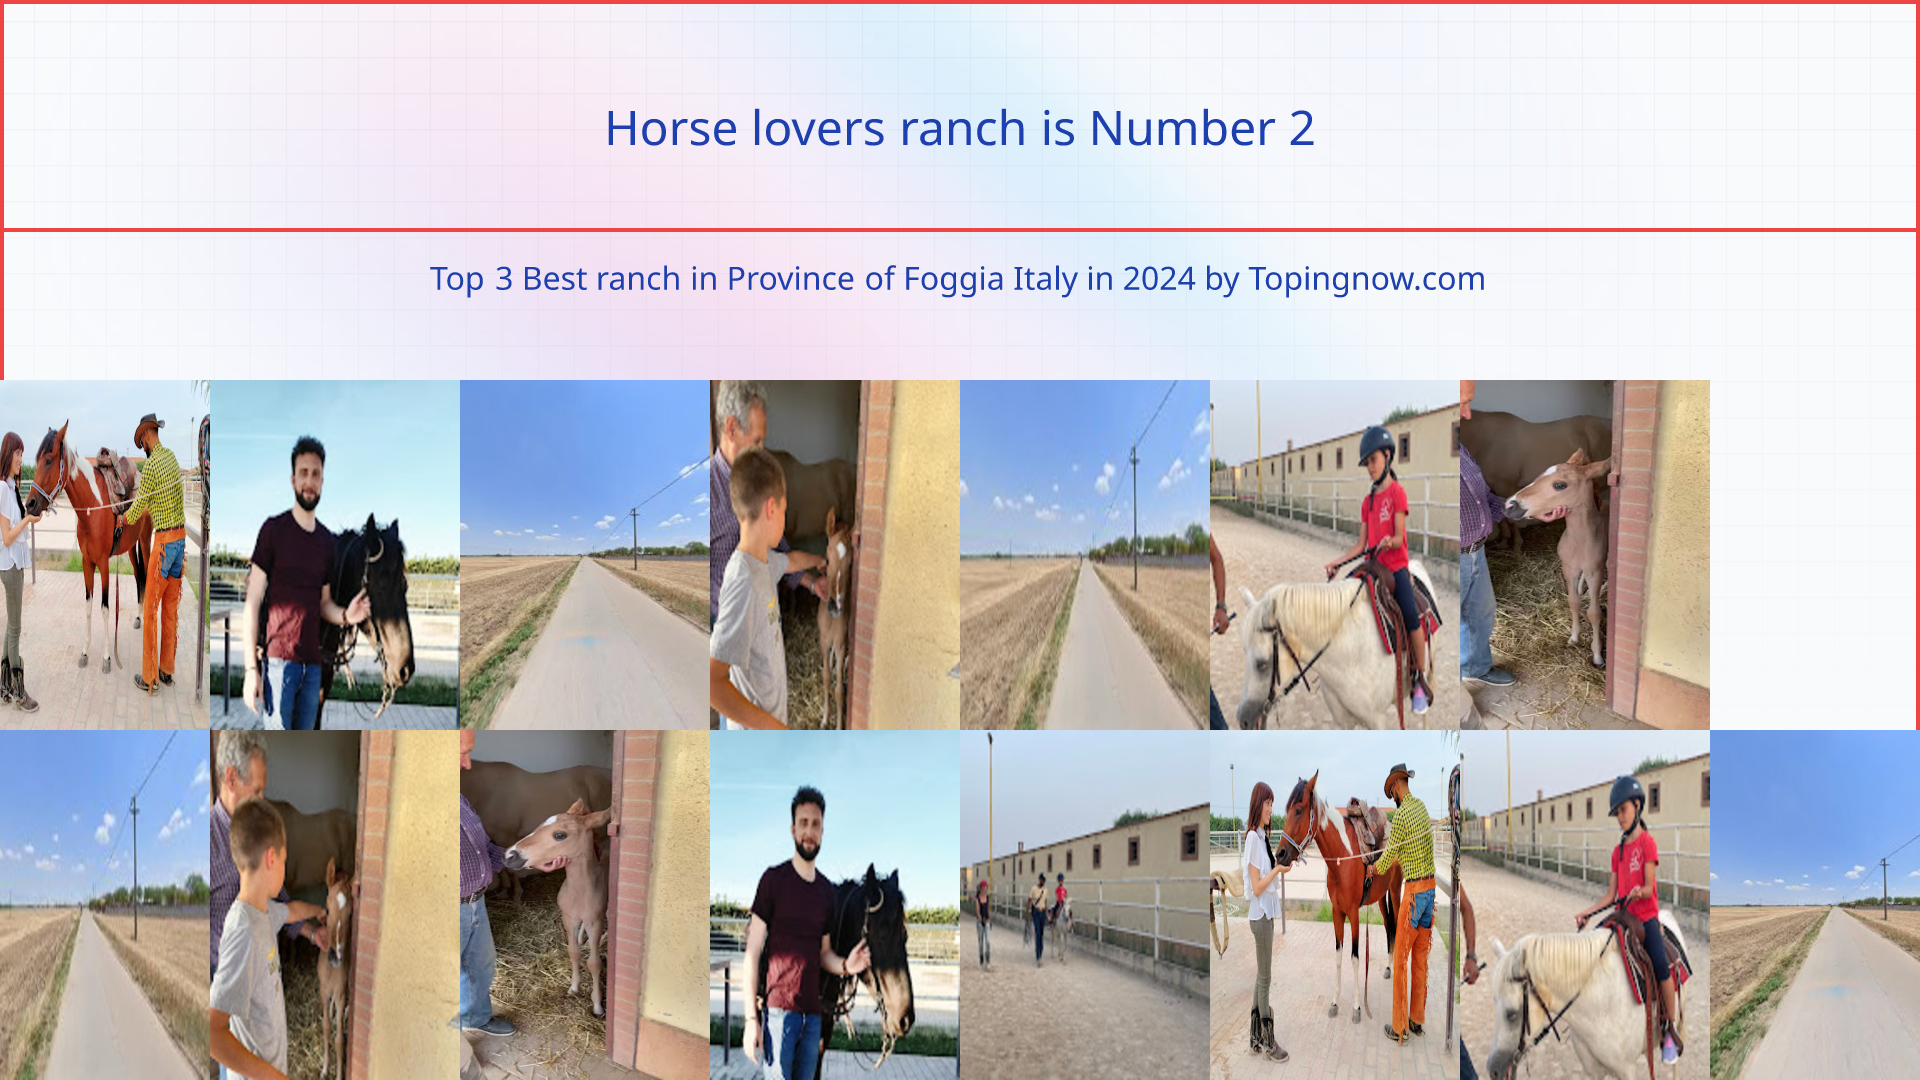 Horse lovers ranch: Top 3 Best ranch in Province of Foggia Italy in 2024